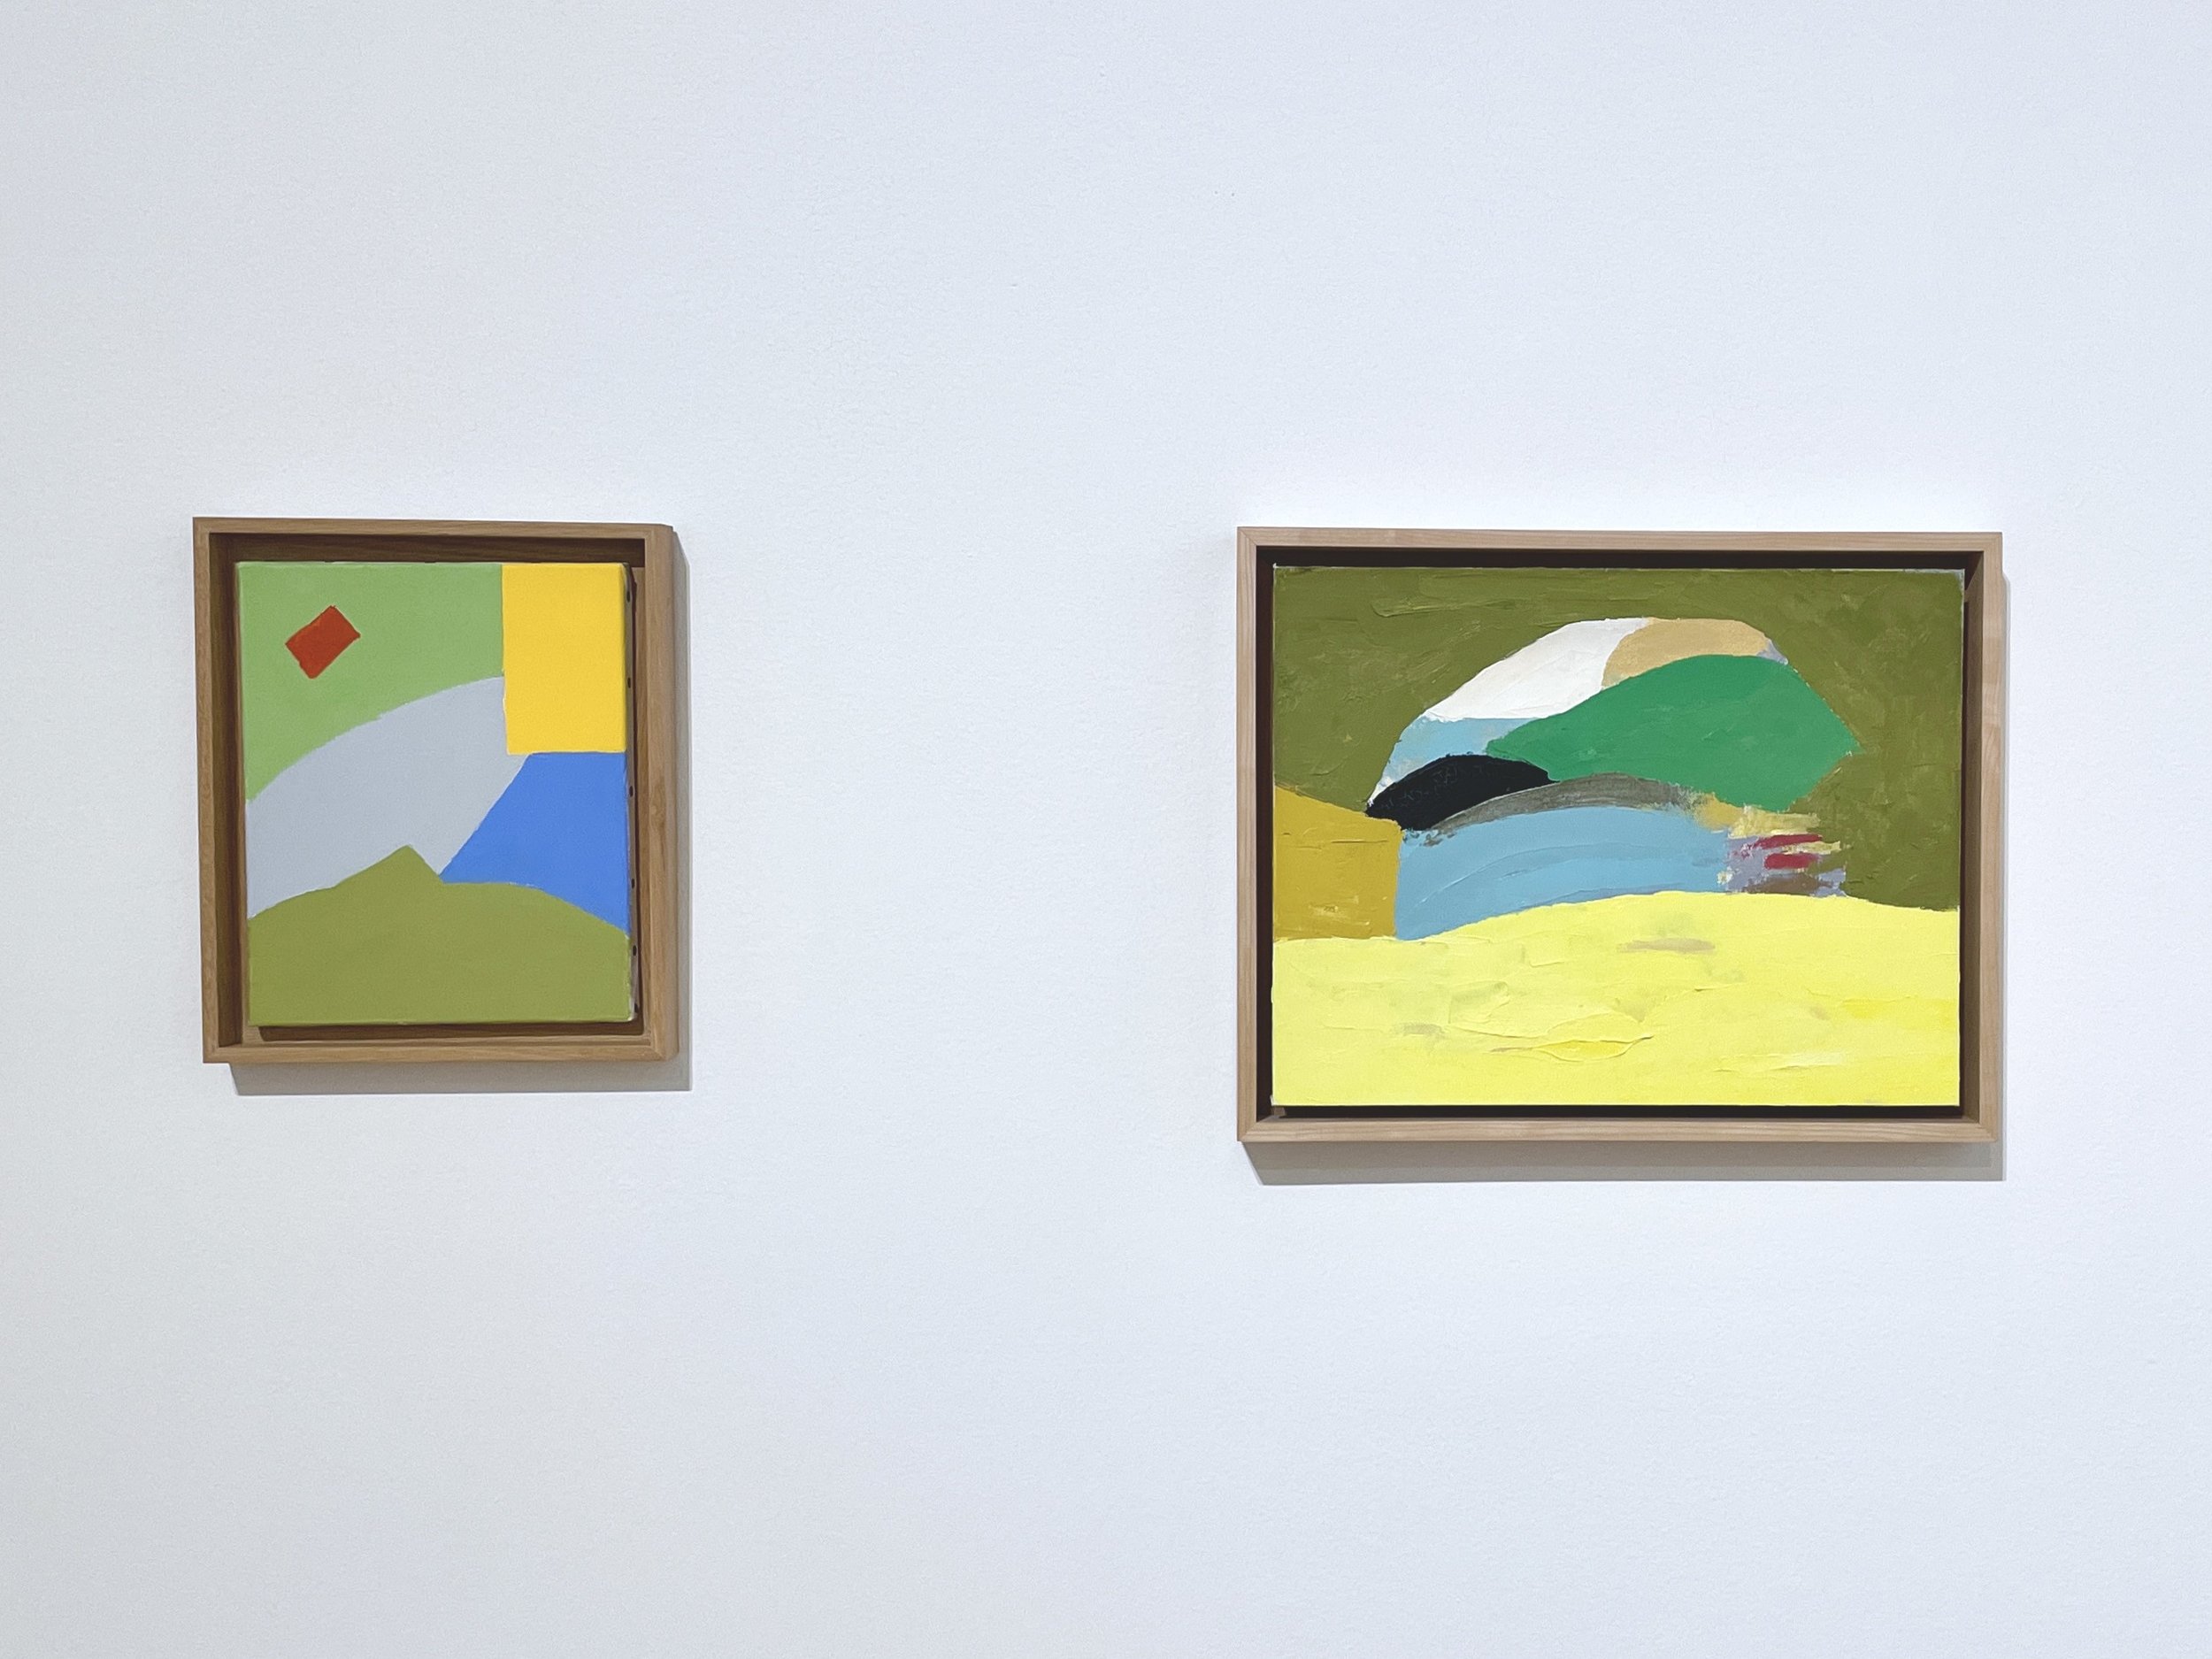   Untitled , 2014. Oil on canvas 11 3/4 × 9 5/8 inches. Collection of A.W. McNulty;  Untitled , 1989. Oil on canvas 15 7/8 × 19 7/8 inches. Collection of Beth Rudin DeWoody. 